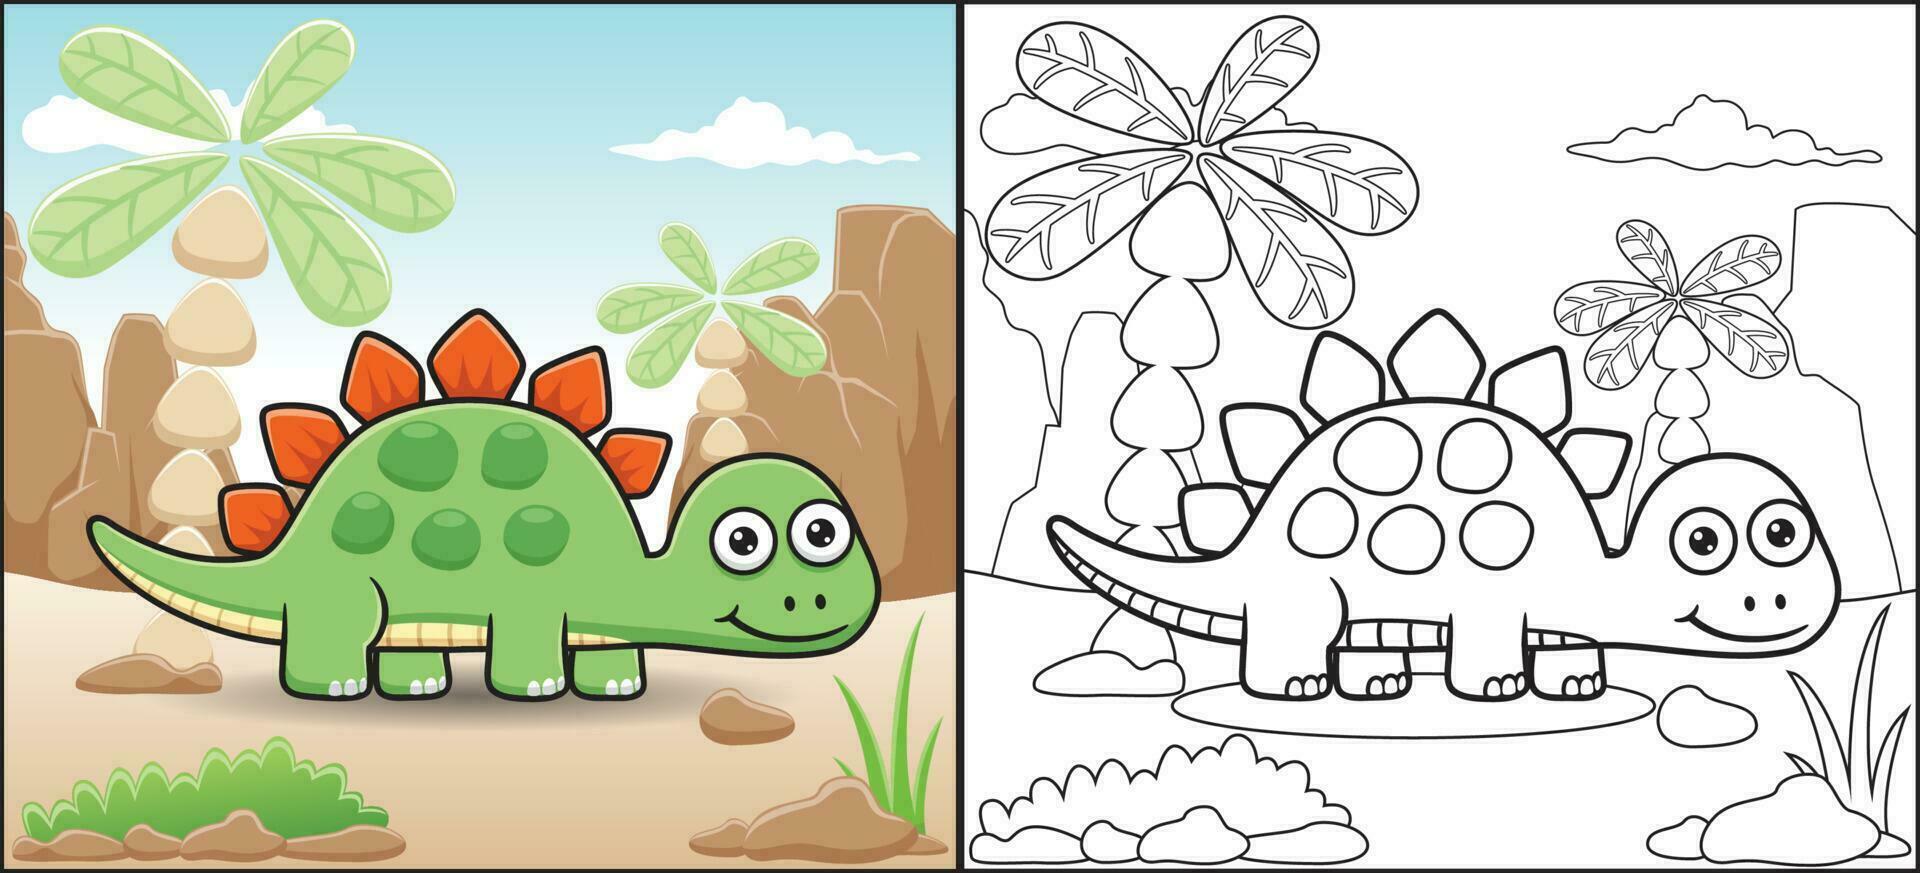 Coloring book or page of stegosaurus cartoon on mountains rock background vector